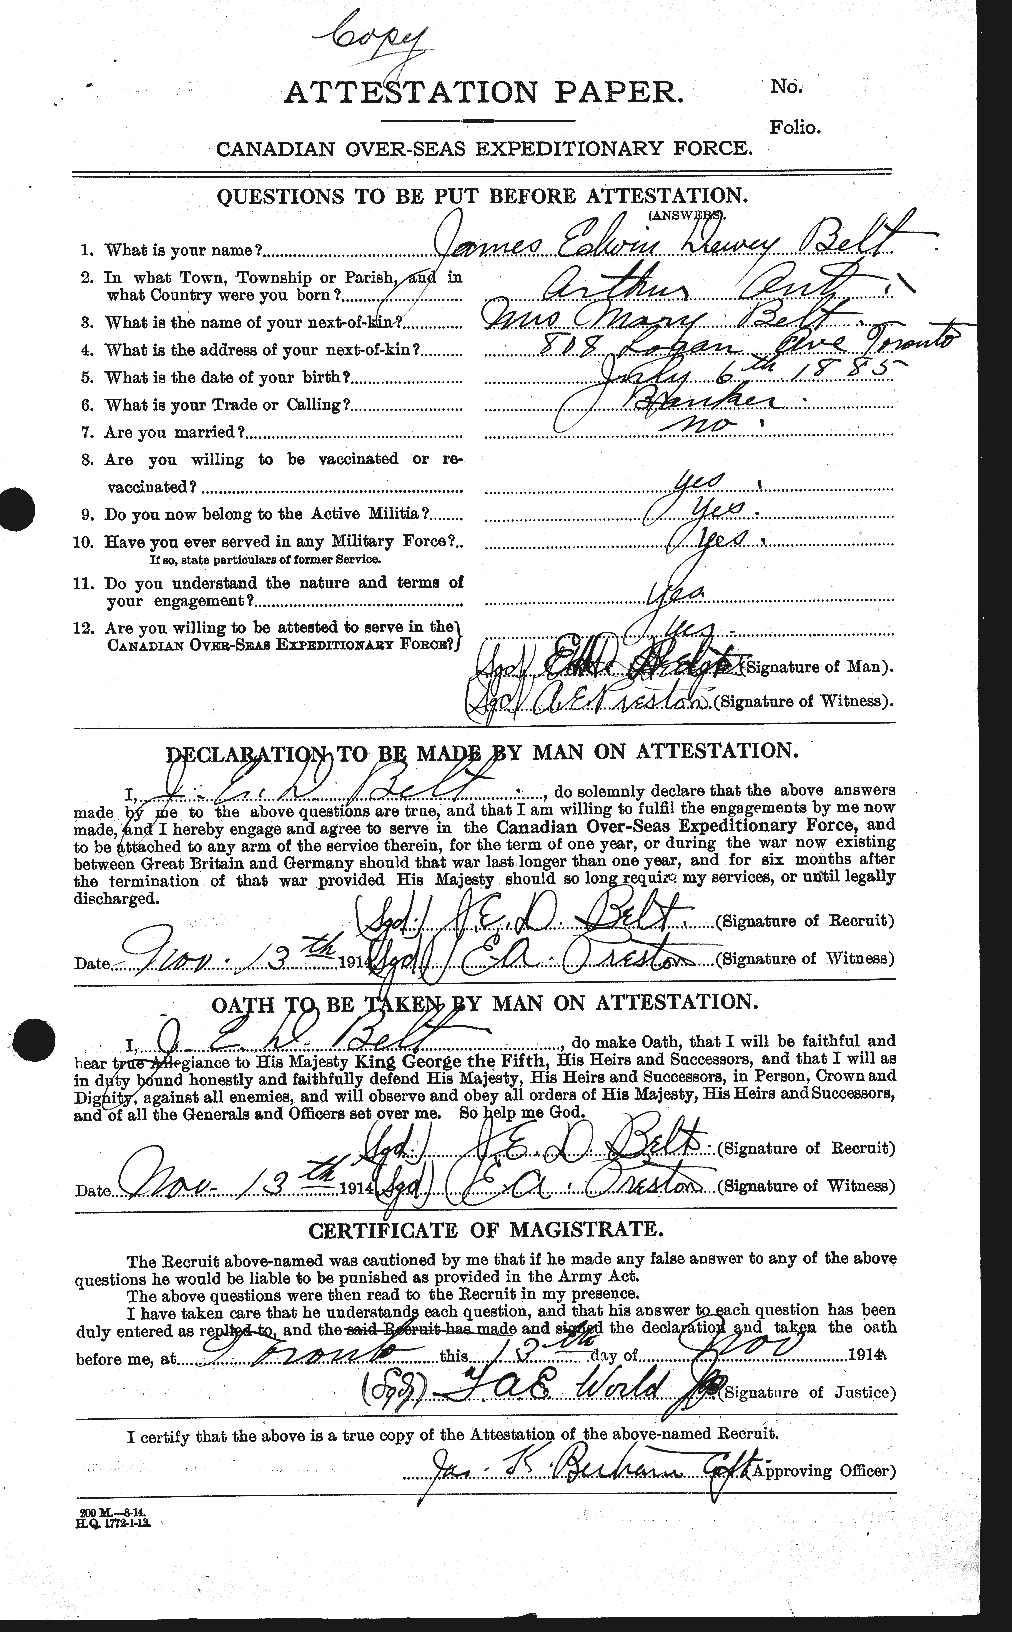 Personnel Records of the First World War - CEF 233642a